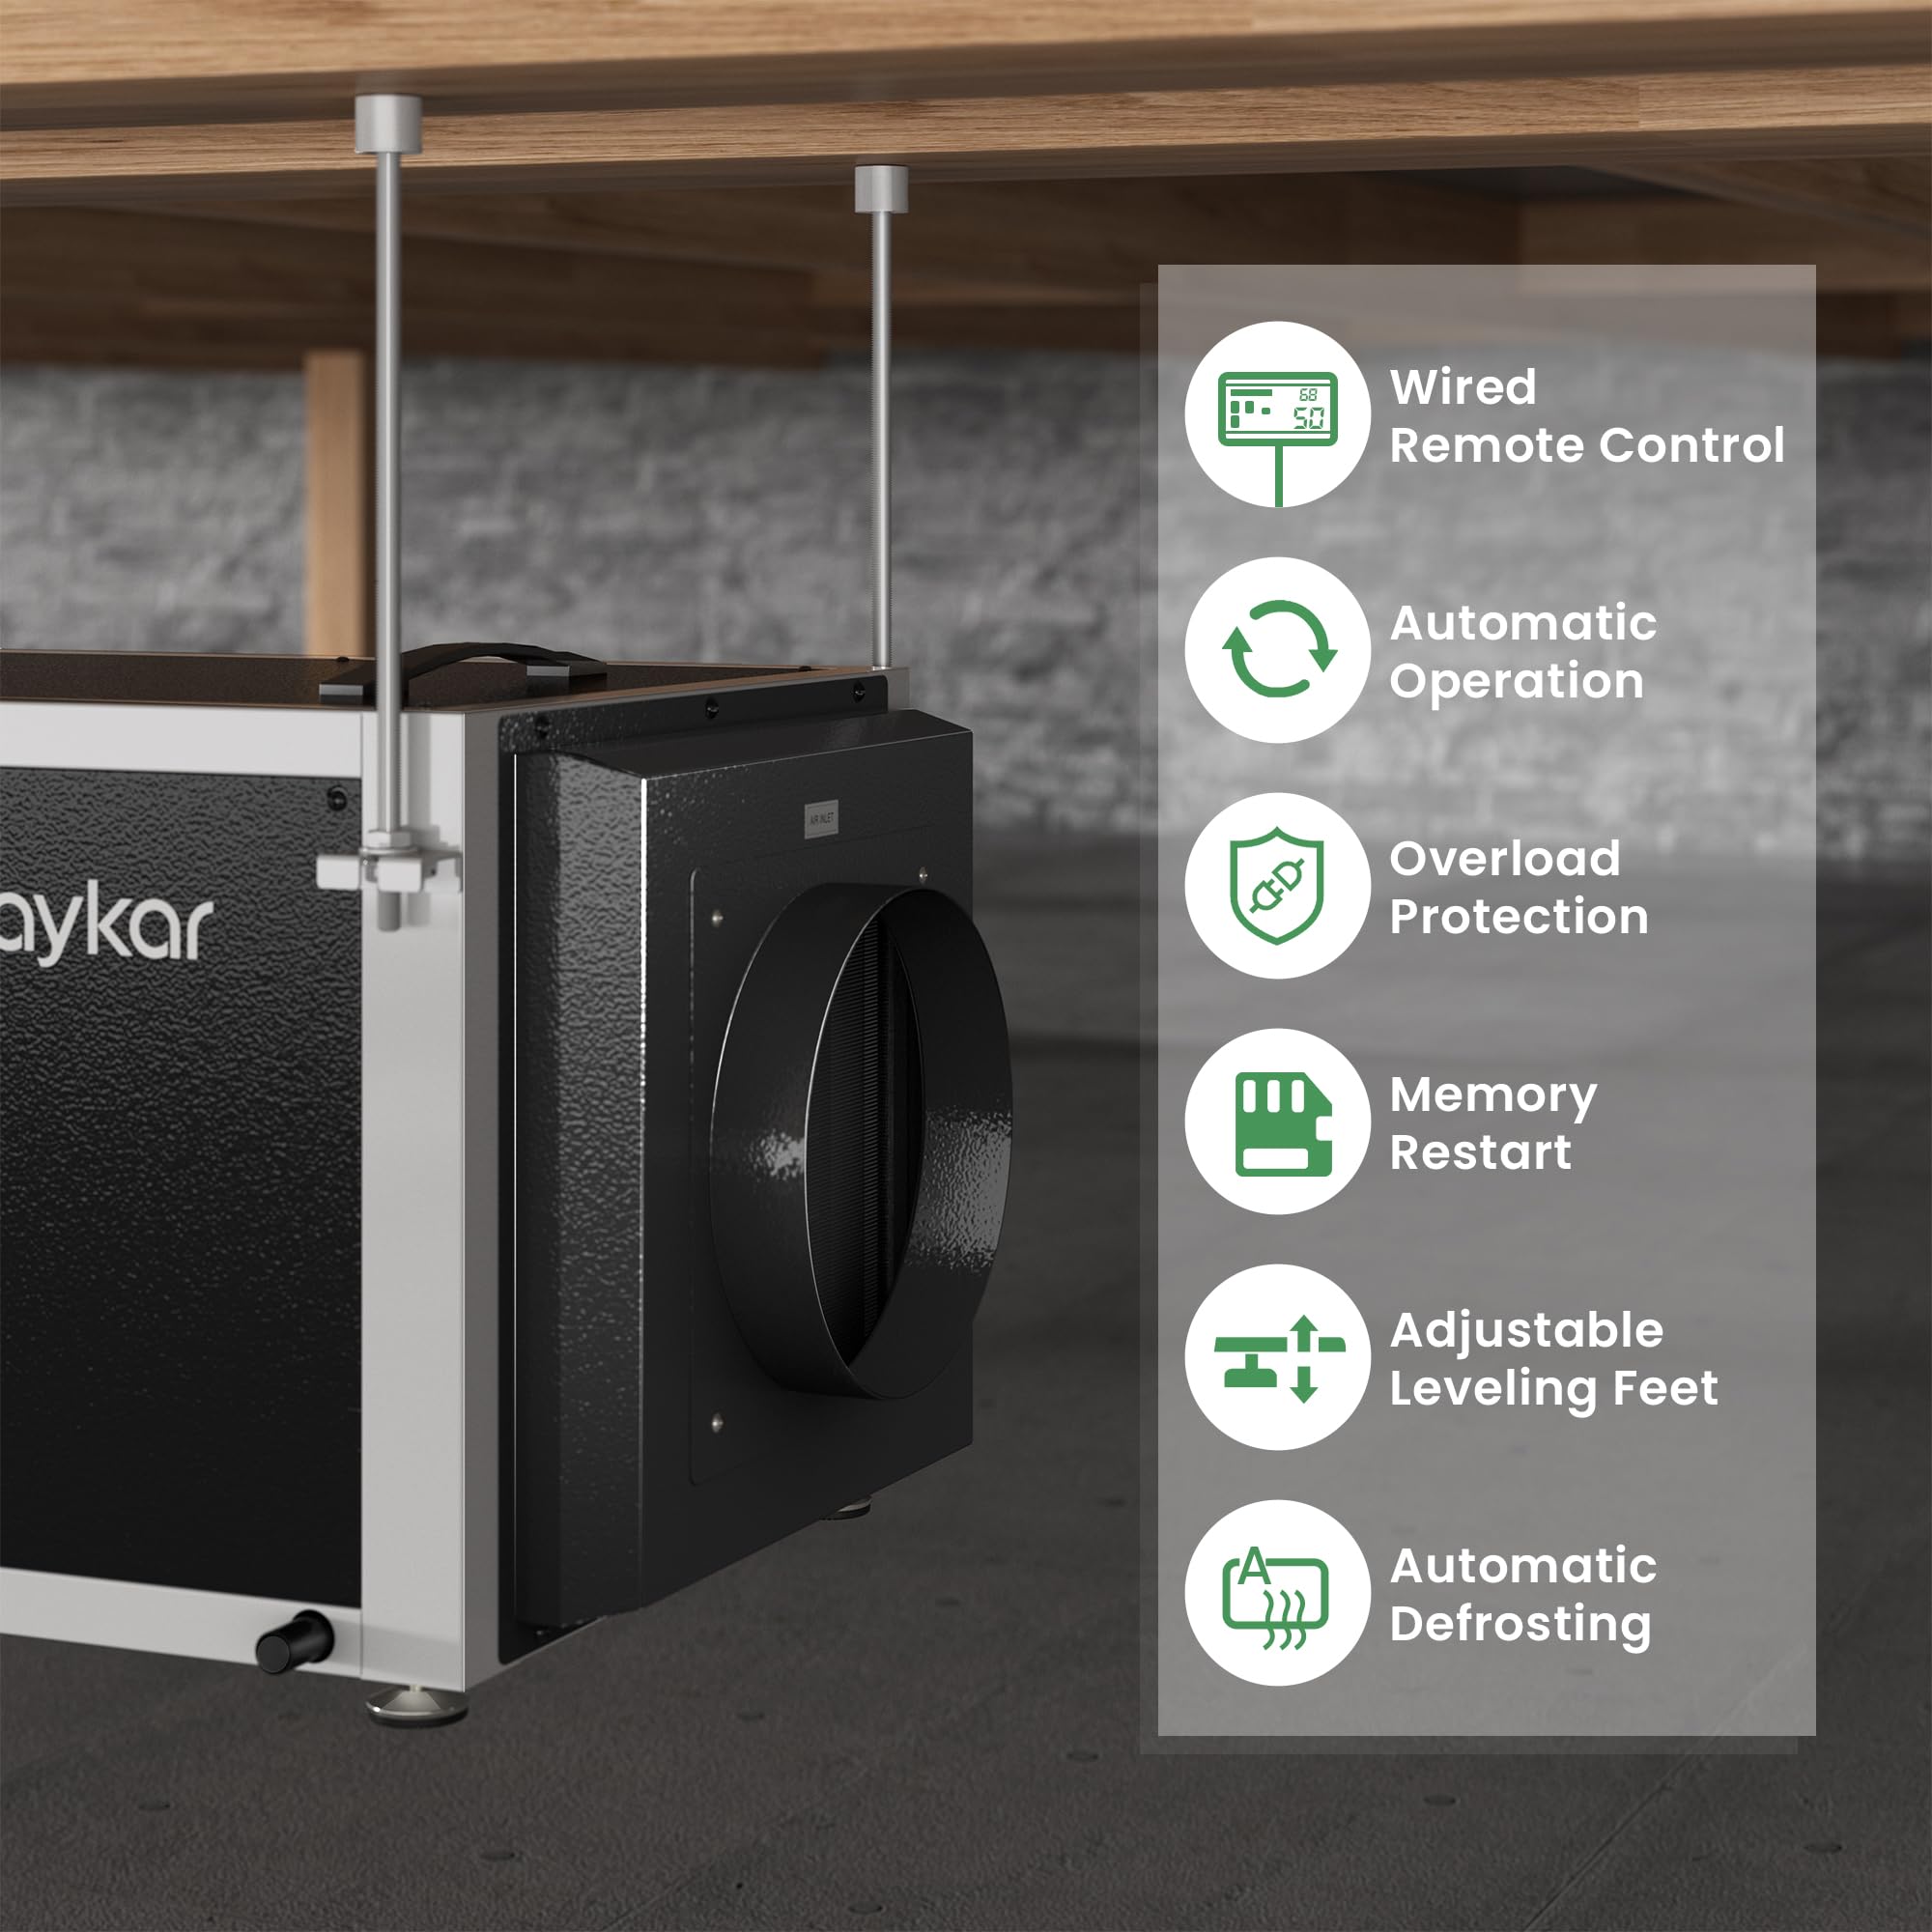 Waykar 158 Pints Commercial Dehumidifier for Crawl Spaces, Dual Duct HVAC Industrial Dehumidifier with Drain Hose for Whole House, Basements, 5 Years Warranty.